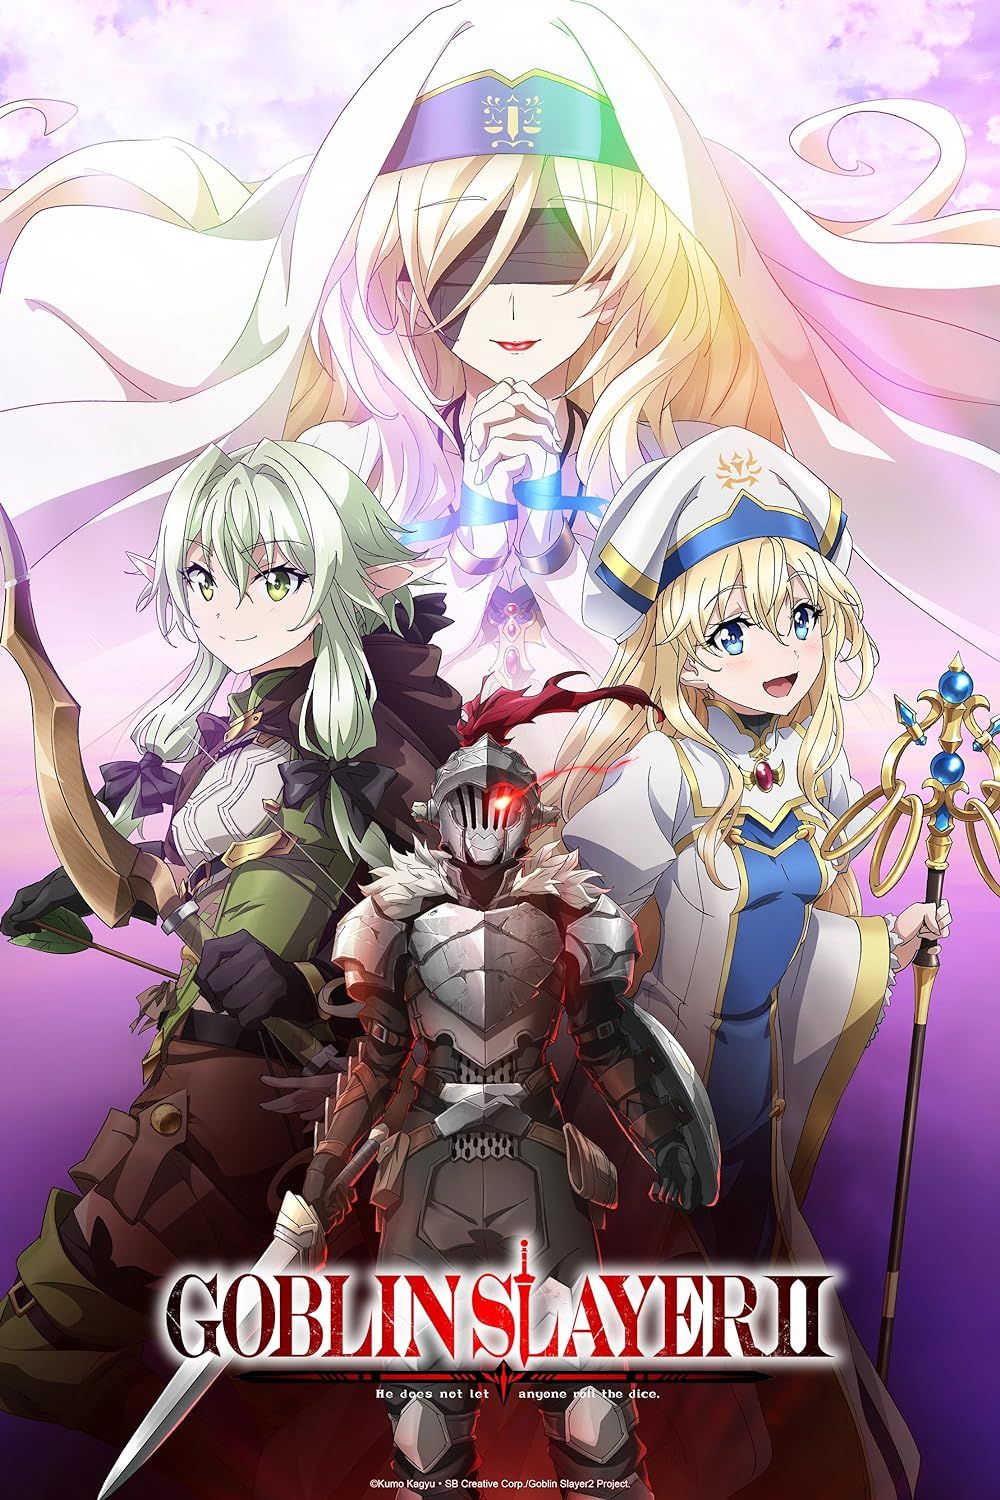 Poster of Goblin Slayer with the main characters posing with their weapons